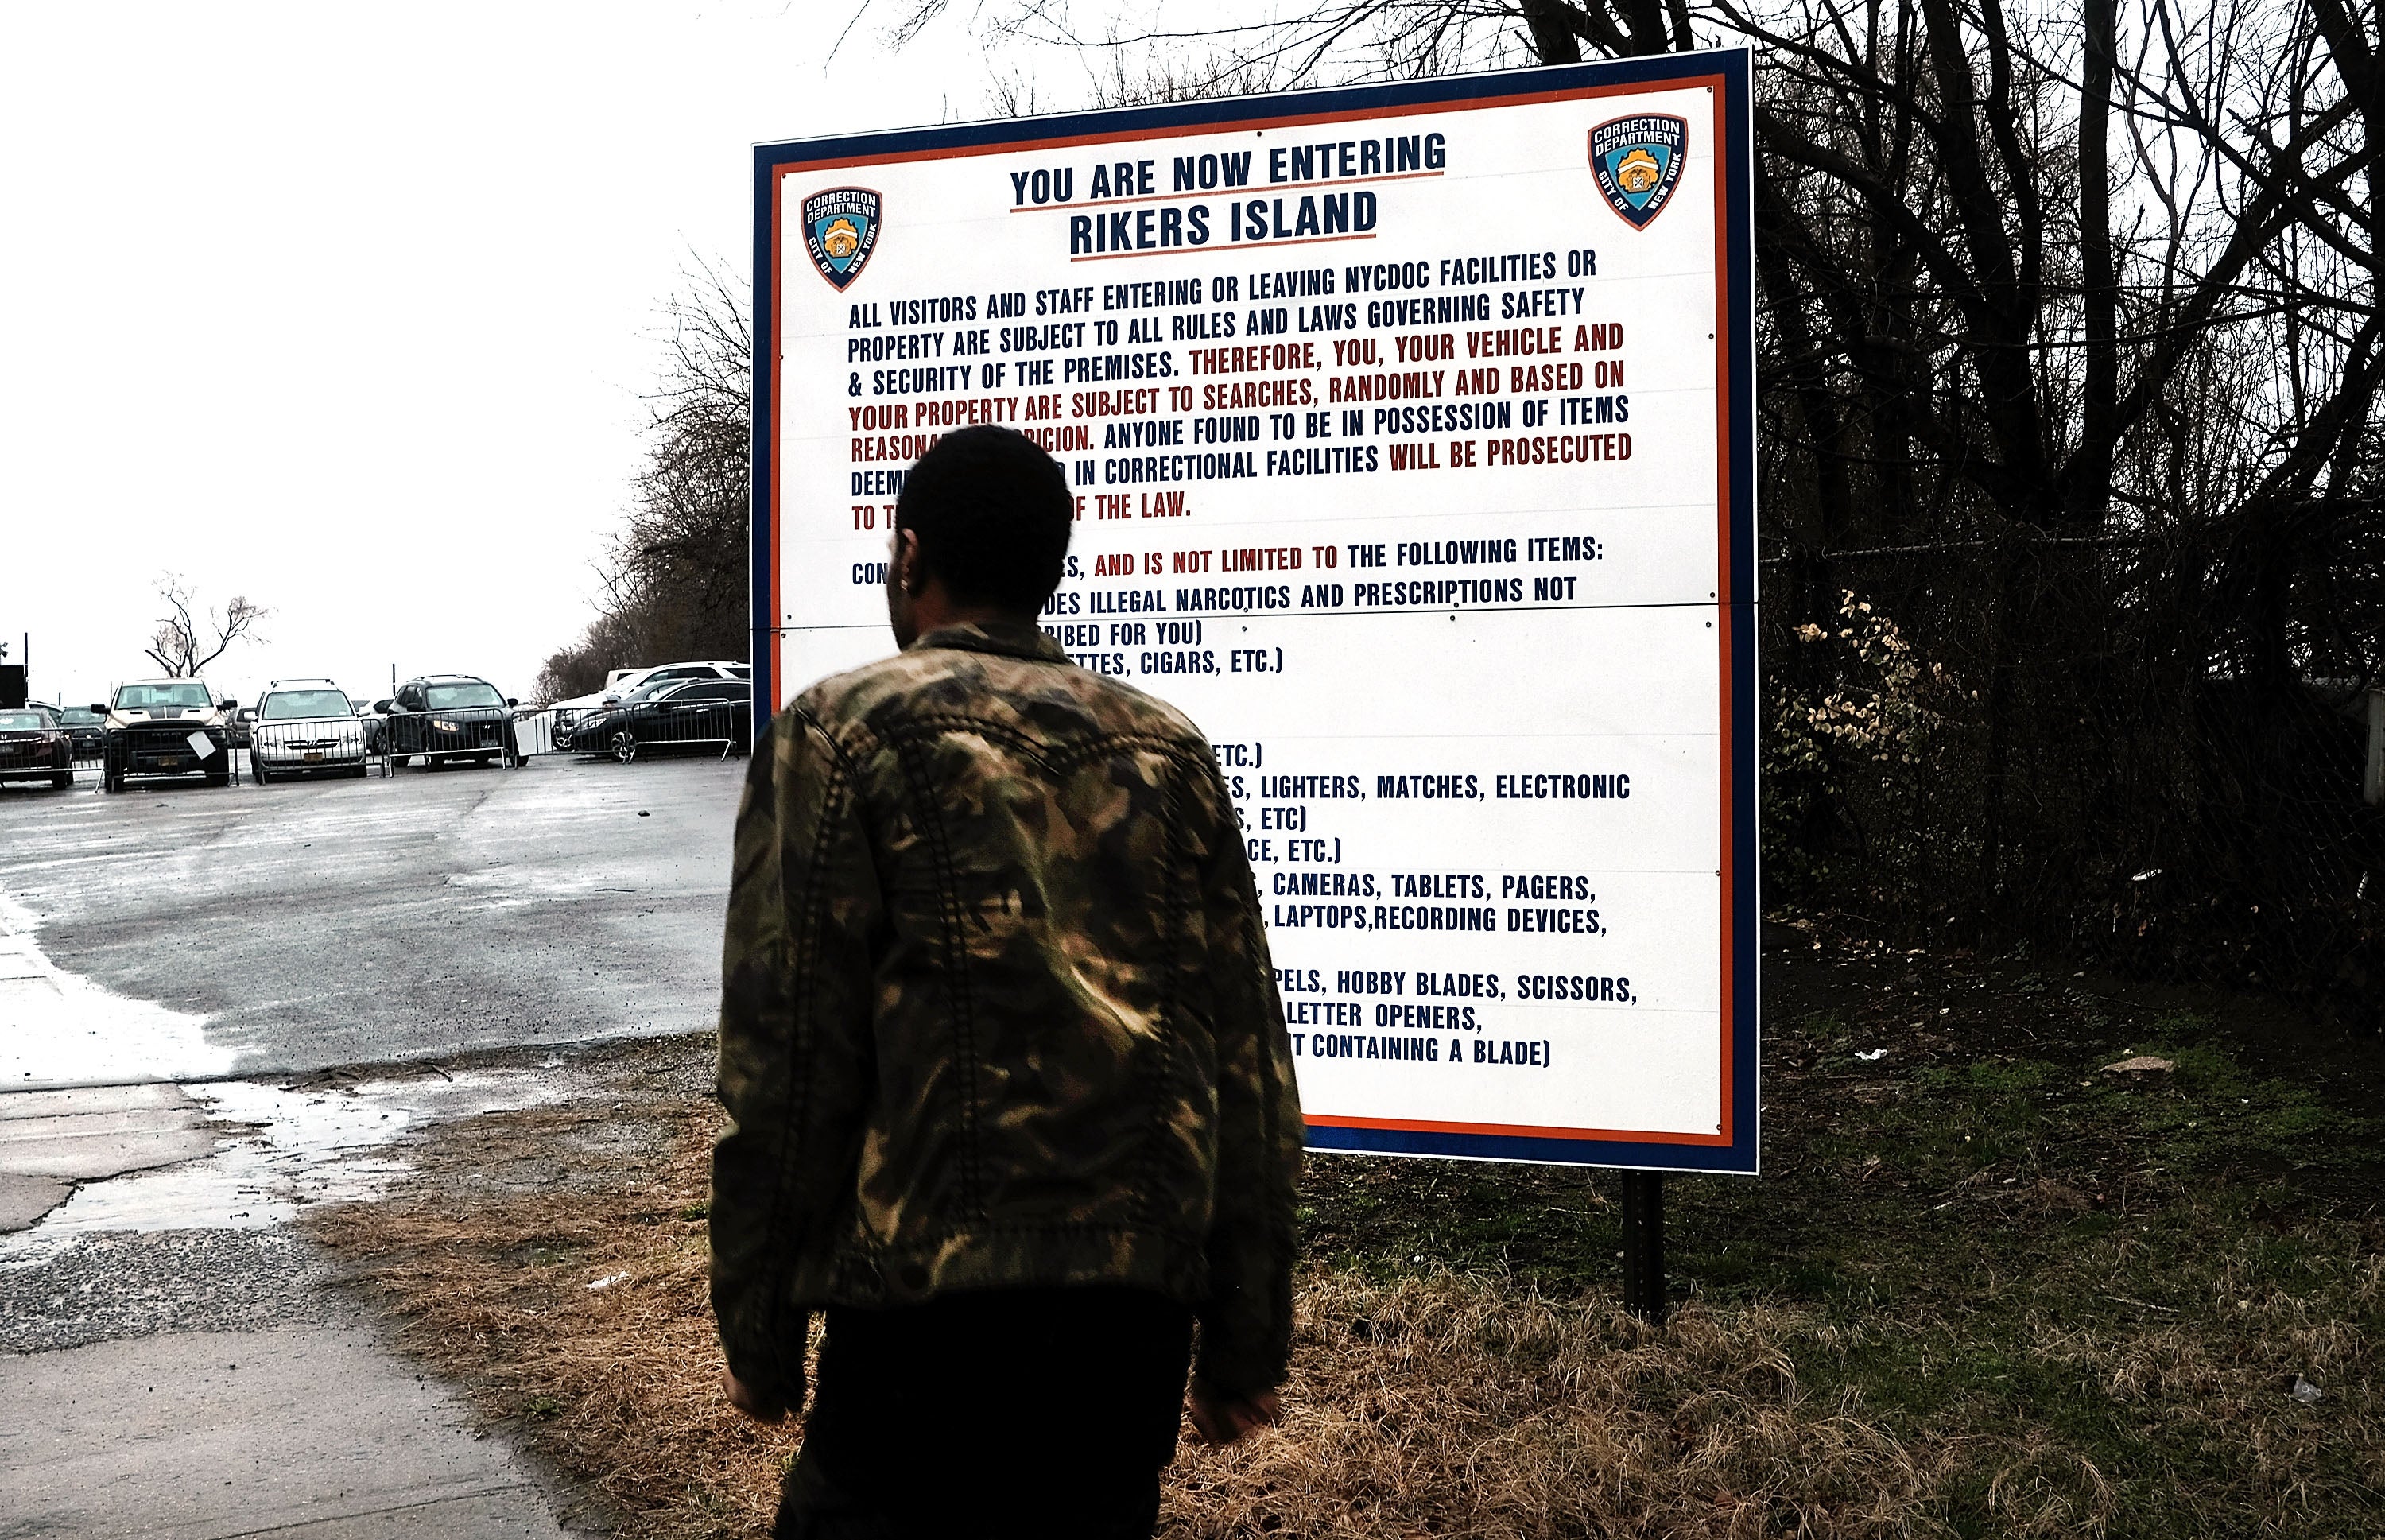 Plan To Close Rikers Island Moves Forward With Input From Community Activists